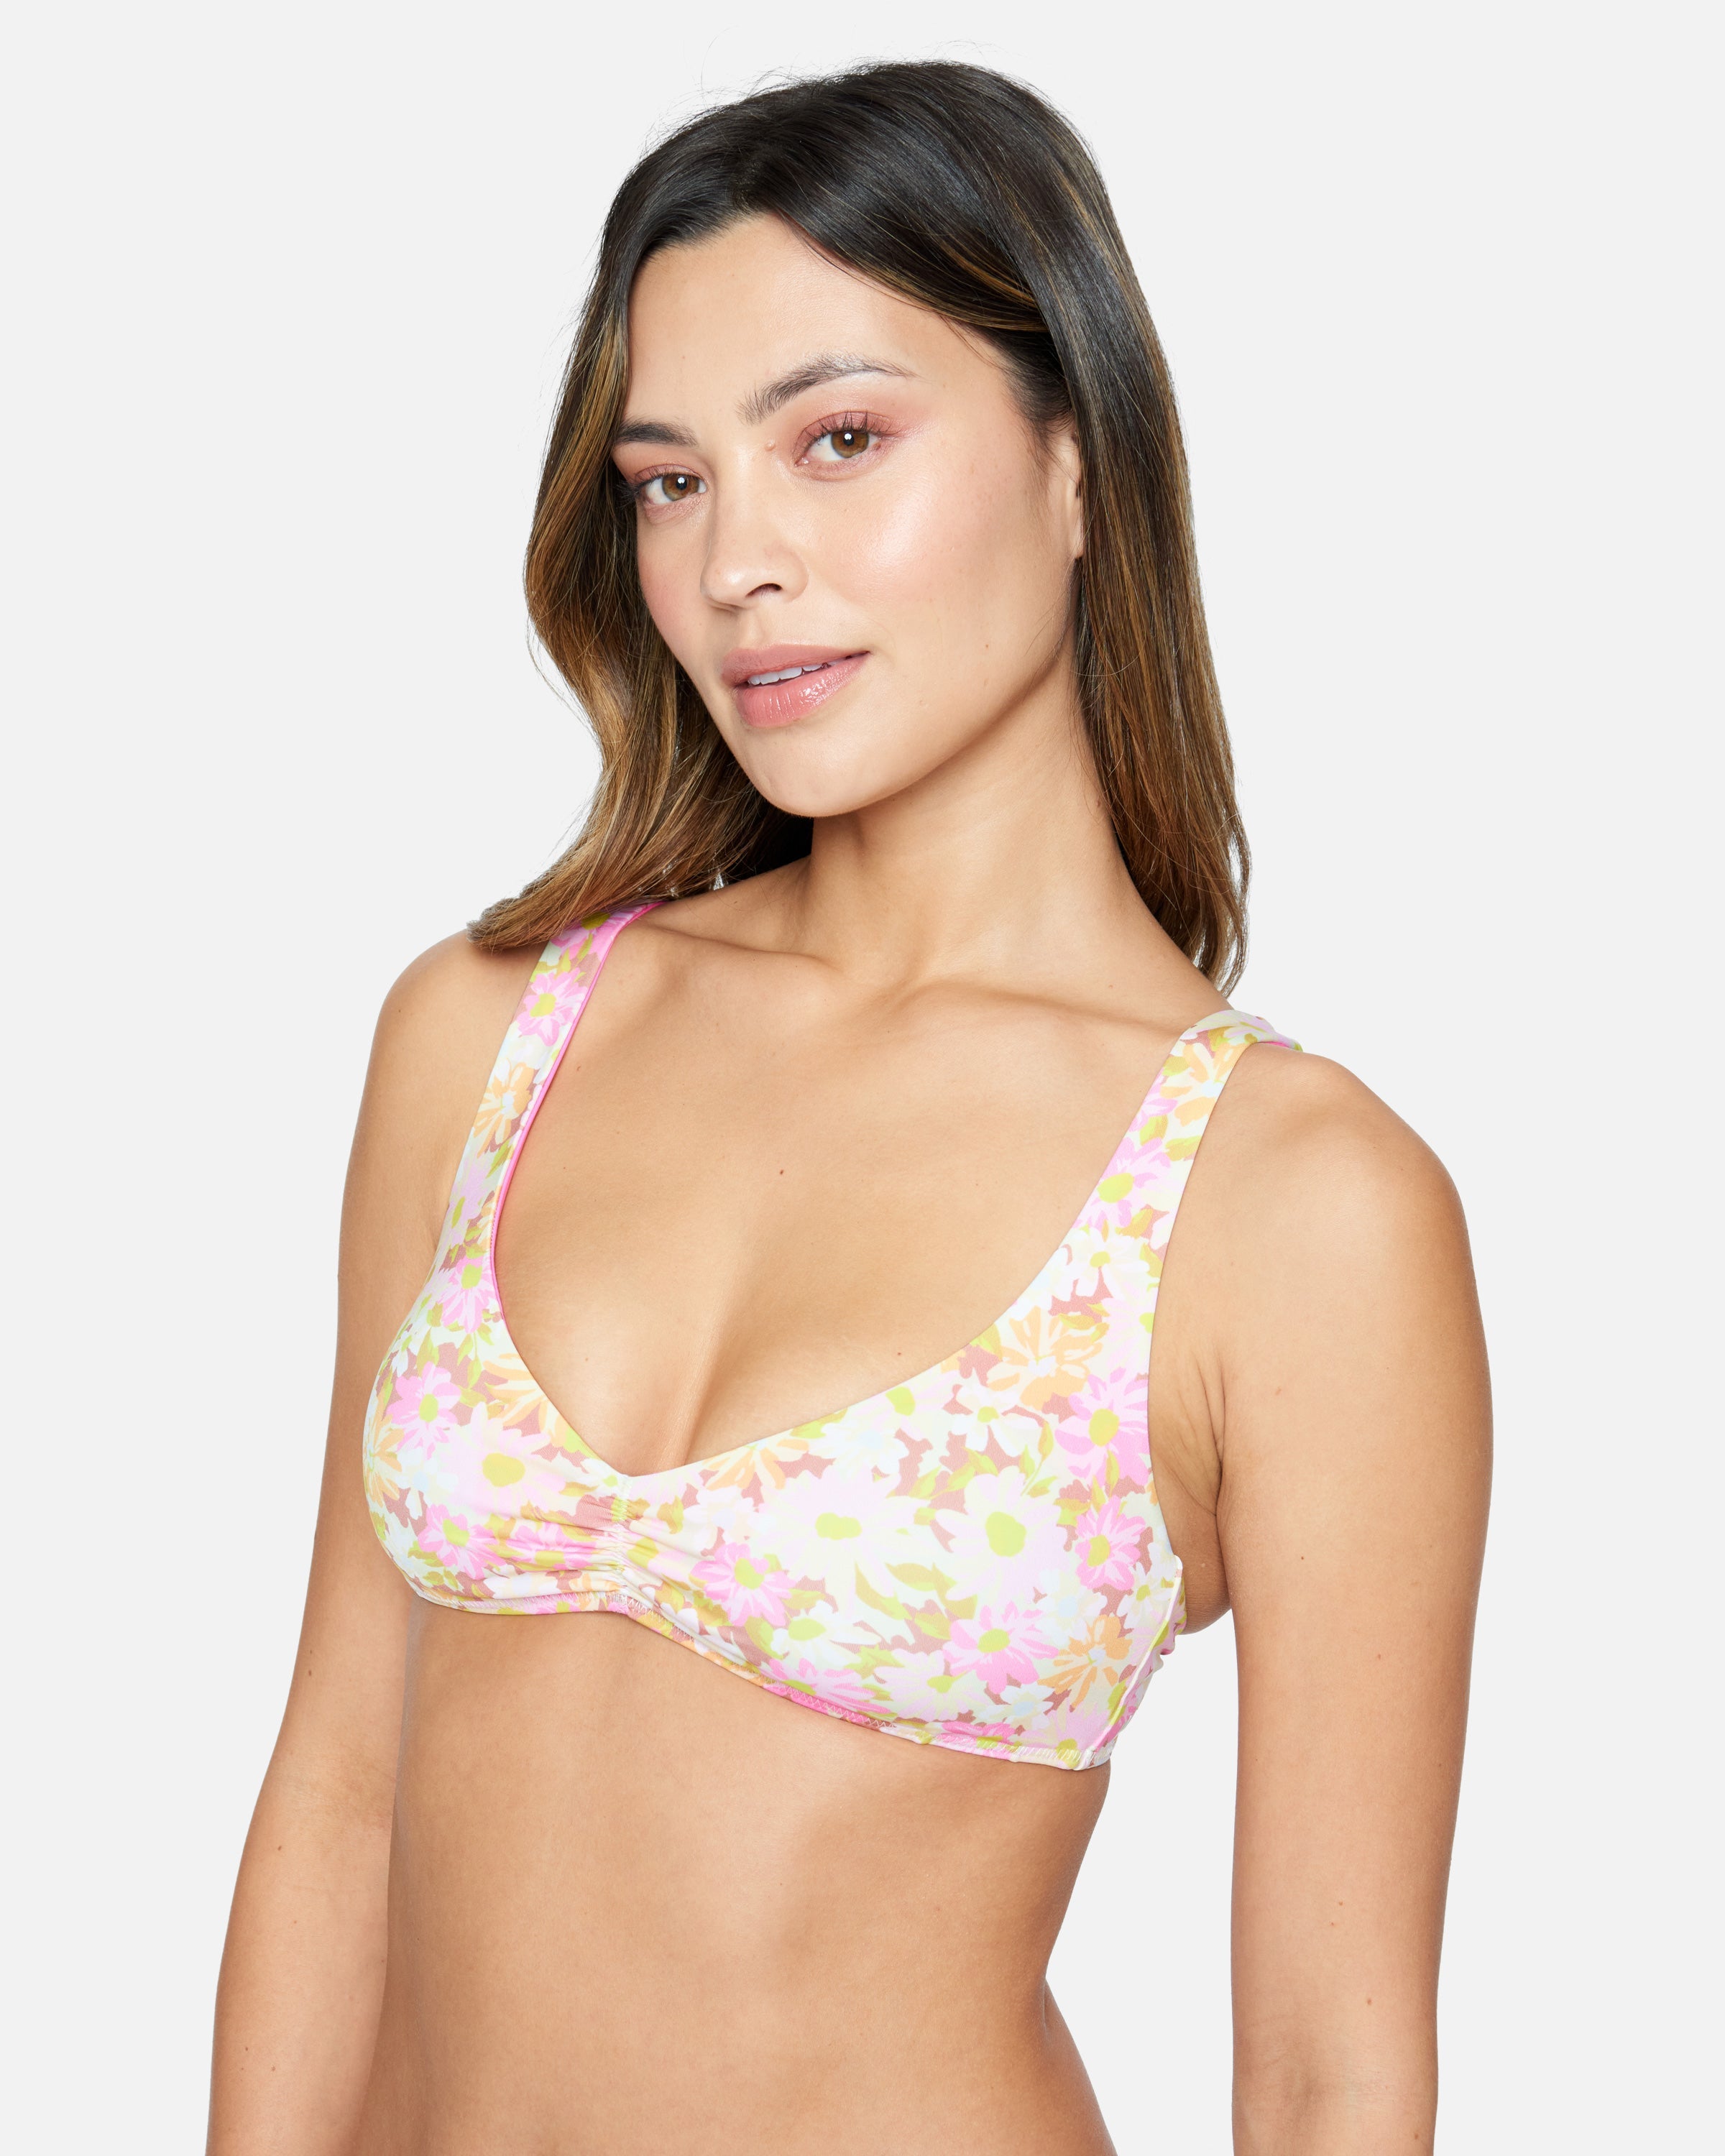 Hurley mint green bra with pink floral print size 38C